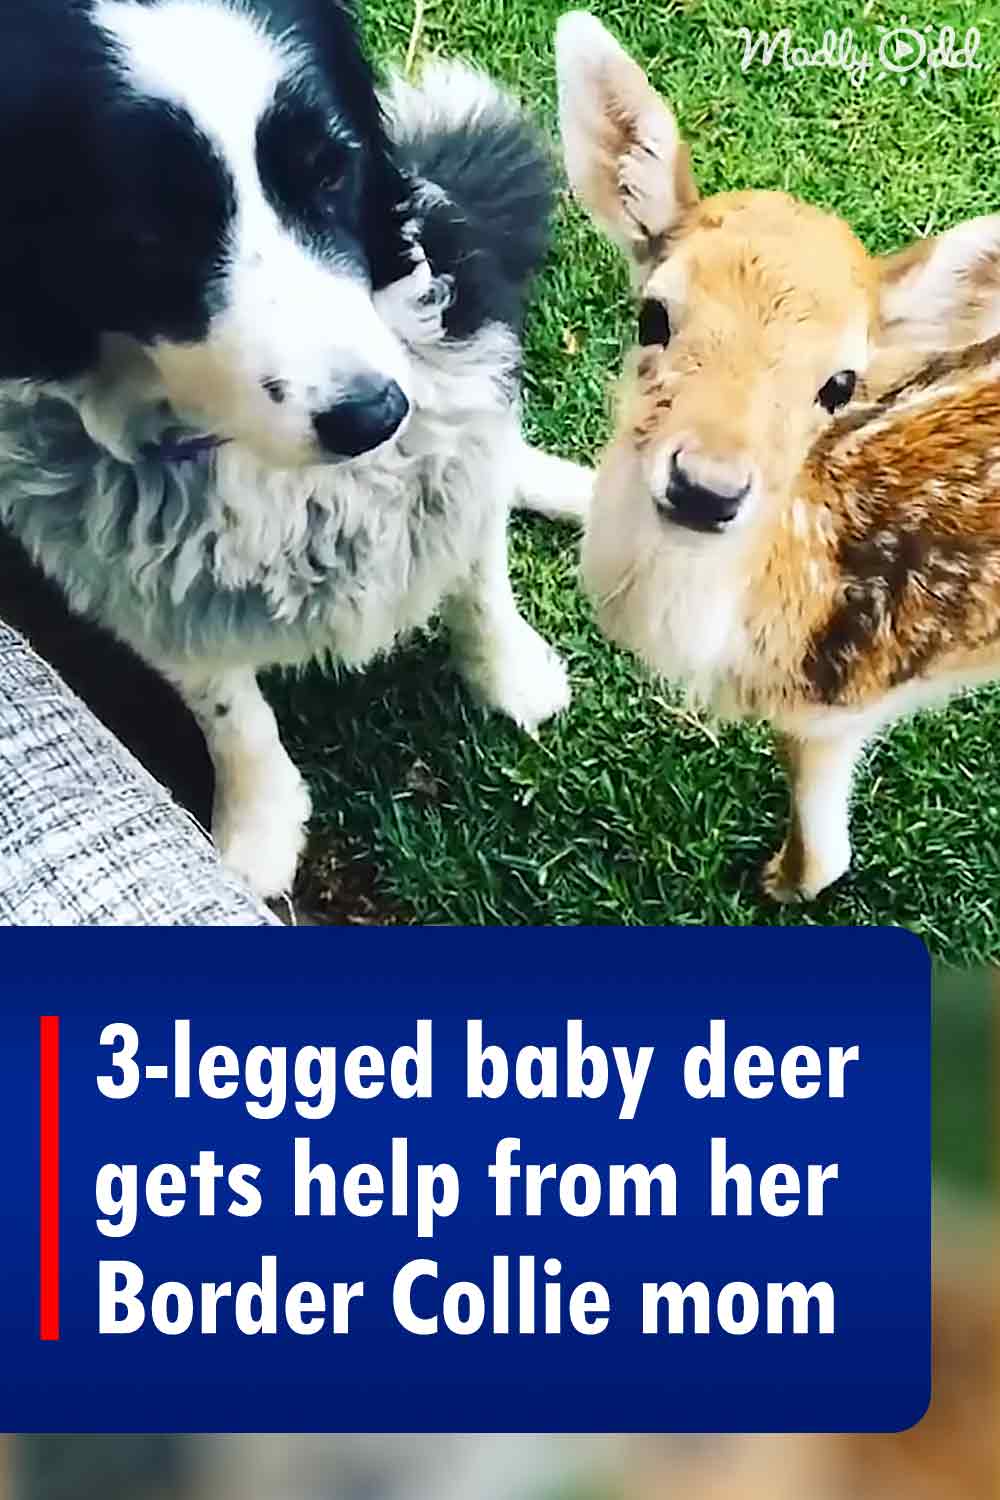 3-legged baby deer gets help from her Border Collie mom